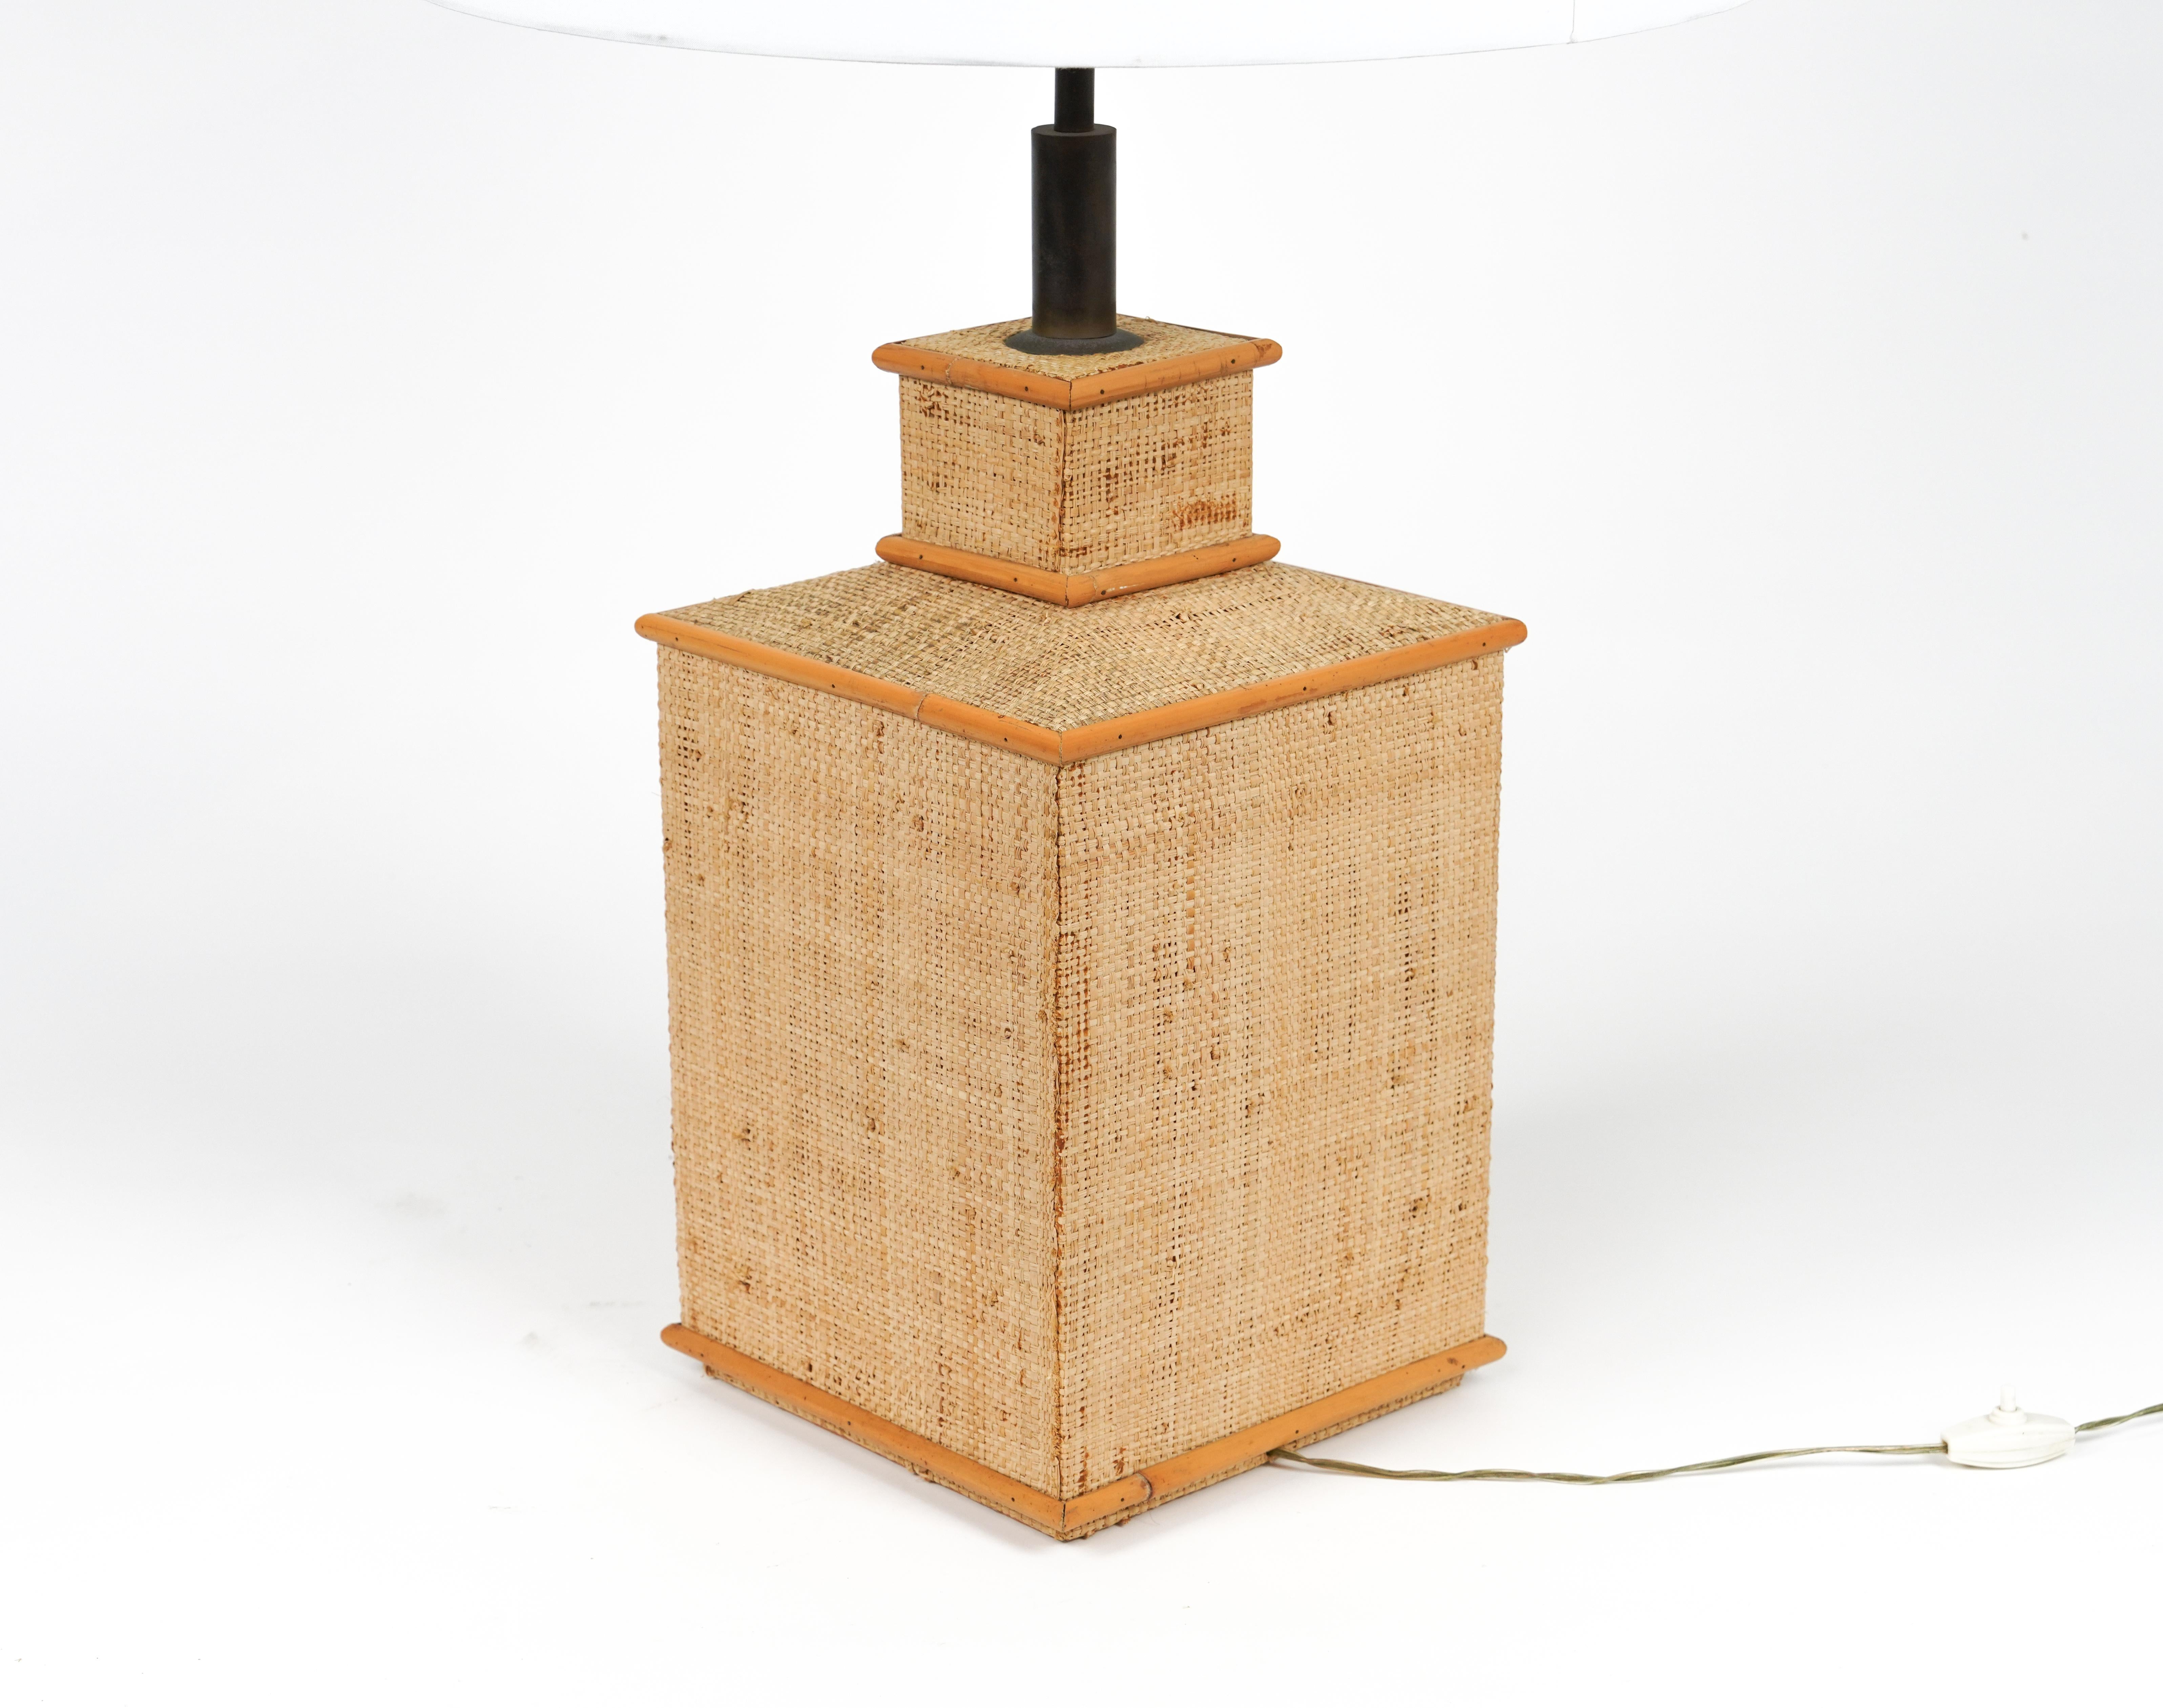 Midcentury Rattan, Wicker and Brass Table Lamp Vivai Del Sud Style, Italy 1960s For Sale 6